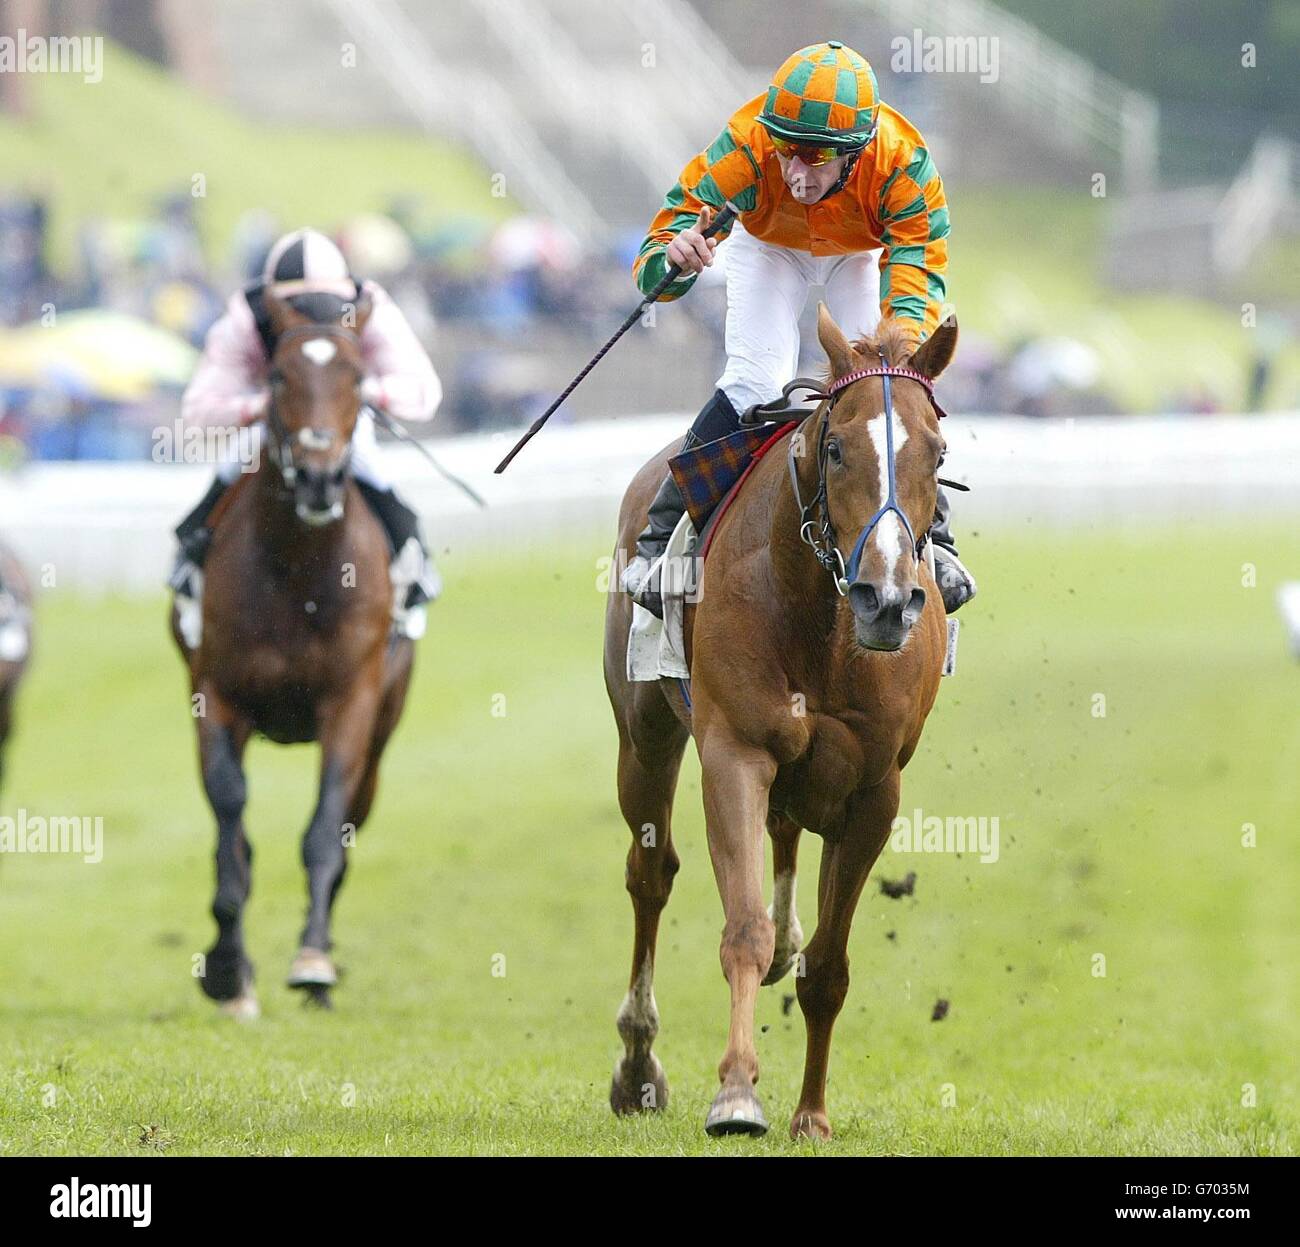 Red Lancer ridden by Robert Mills wins The MBNA Europe Bank Chester Vase at Chester Race Course. Stock Photo